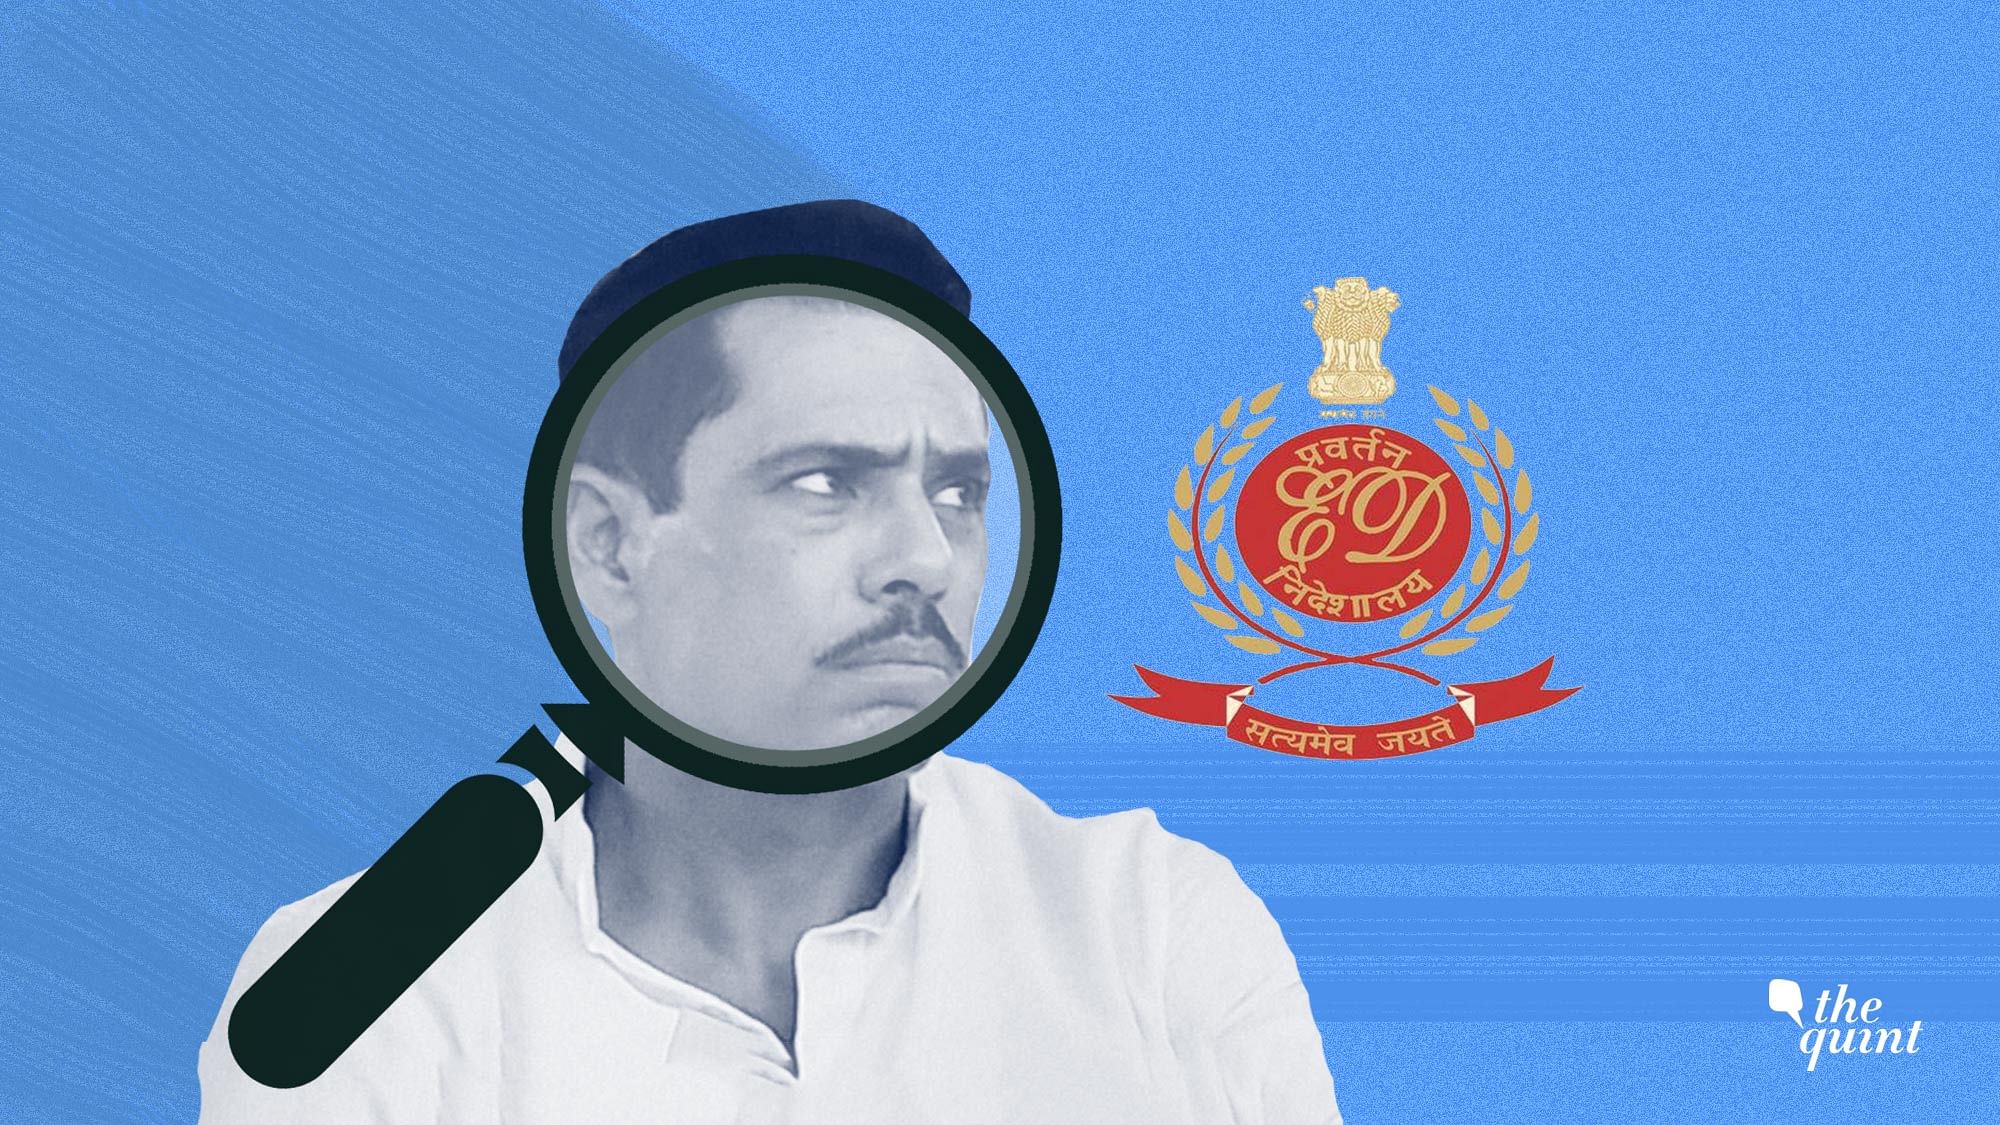 Image of Robert Vadra and the ED logo used for representational purposes.